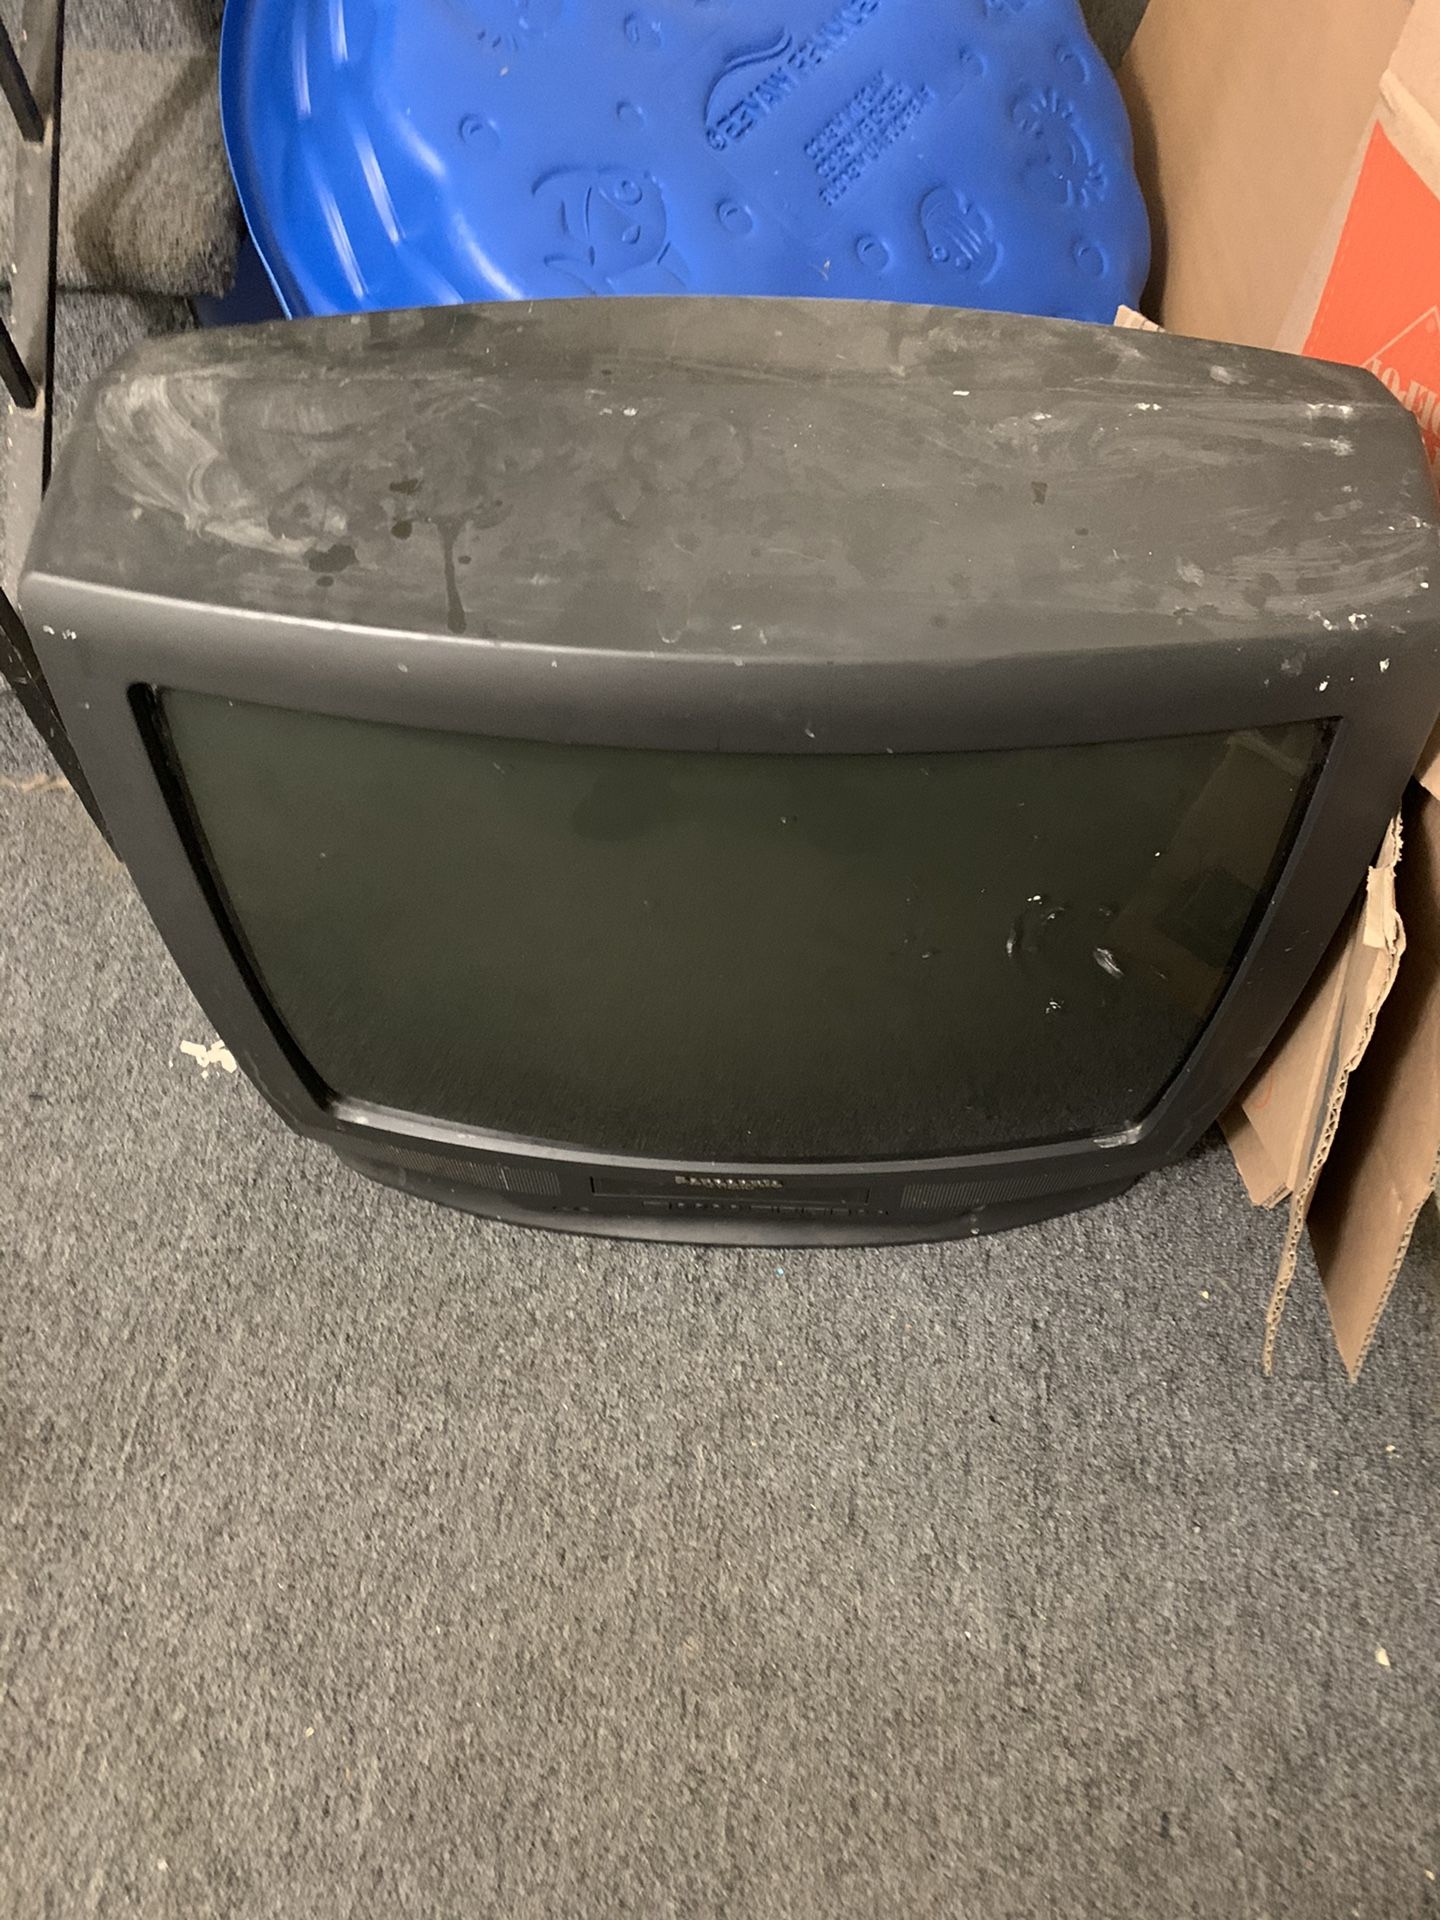 Older tv with built in vhs